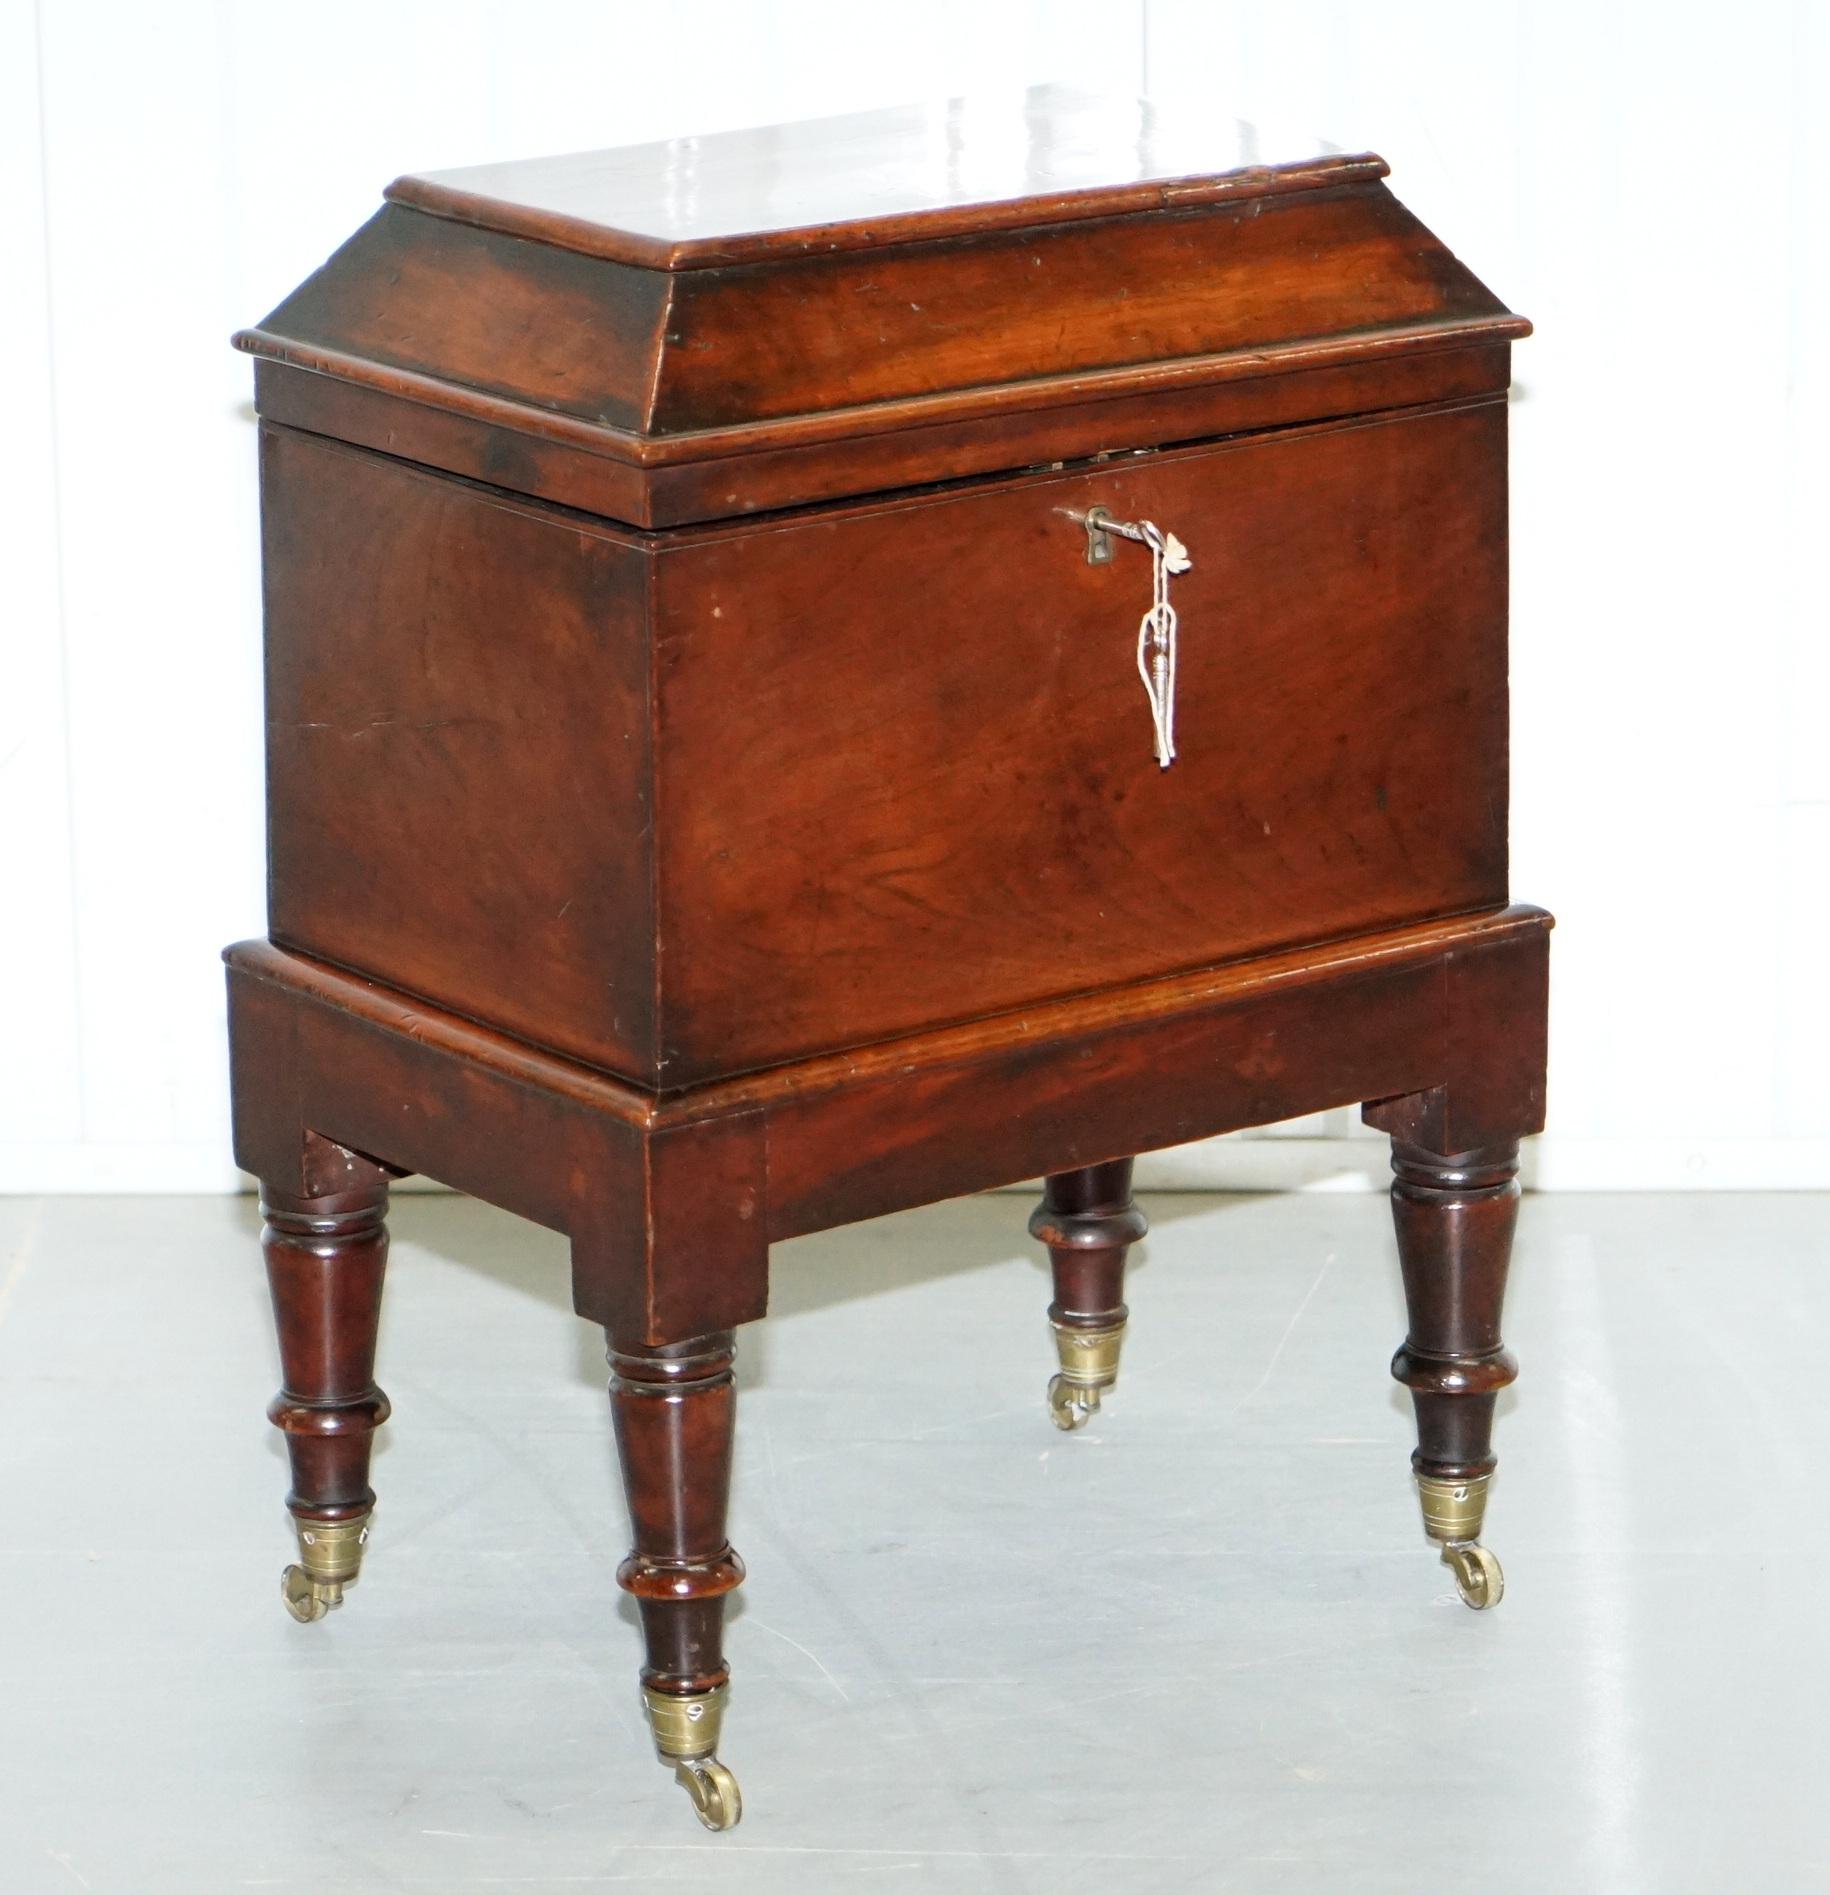 We are delighted to offer for auction this exceptionally rare Regency Mahogany Cellarette of Sarcophagus form in solid mahogany on turned legs

A very good looking and well-made piece, it has a nice size table size to it, the internals have